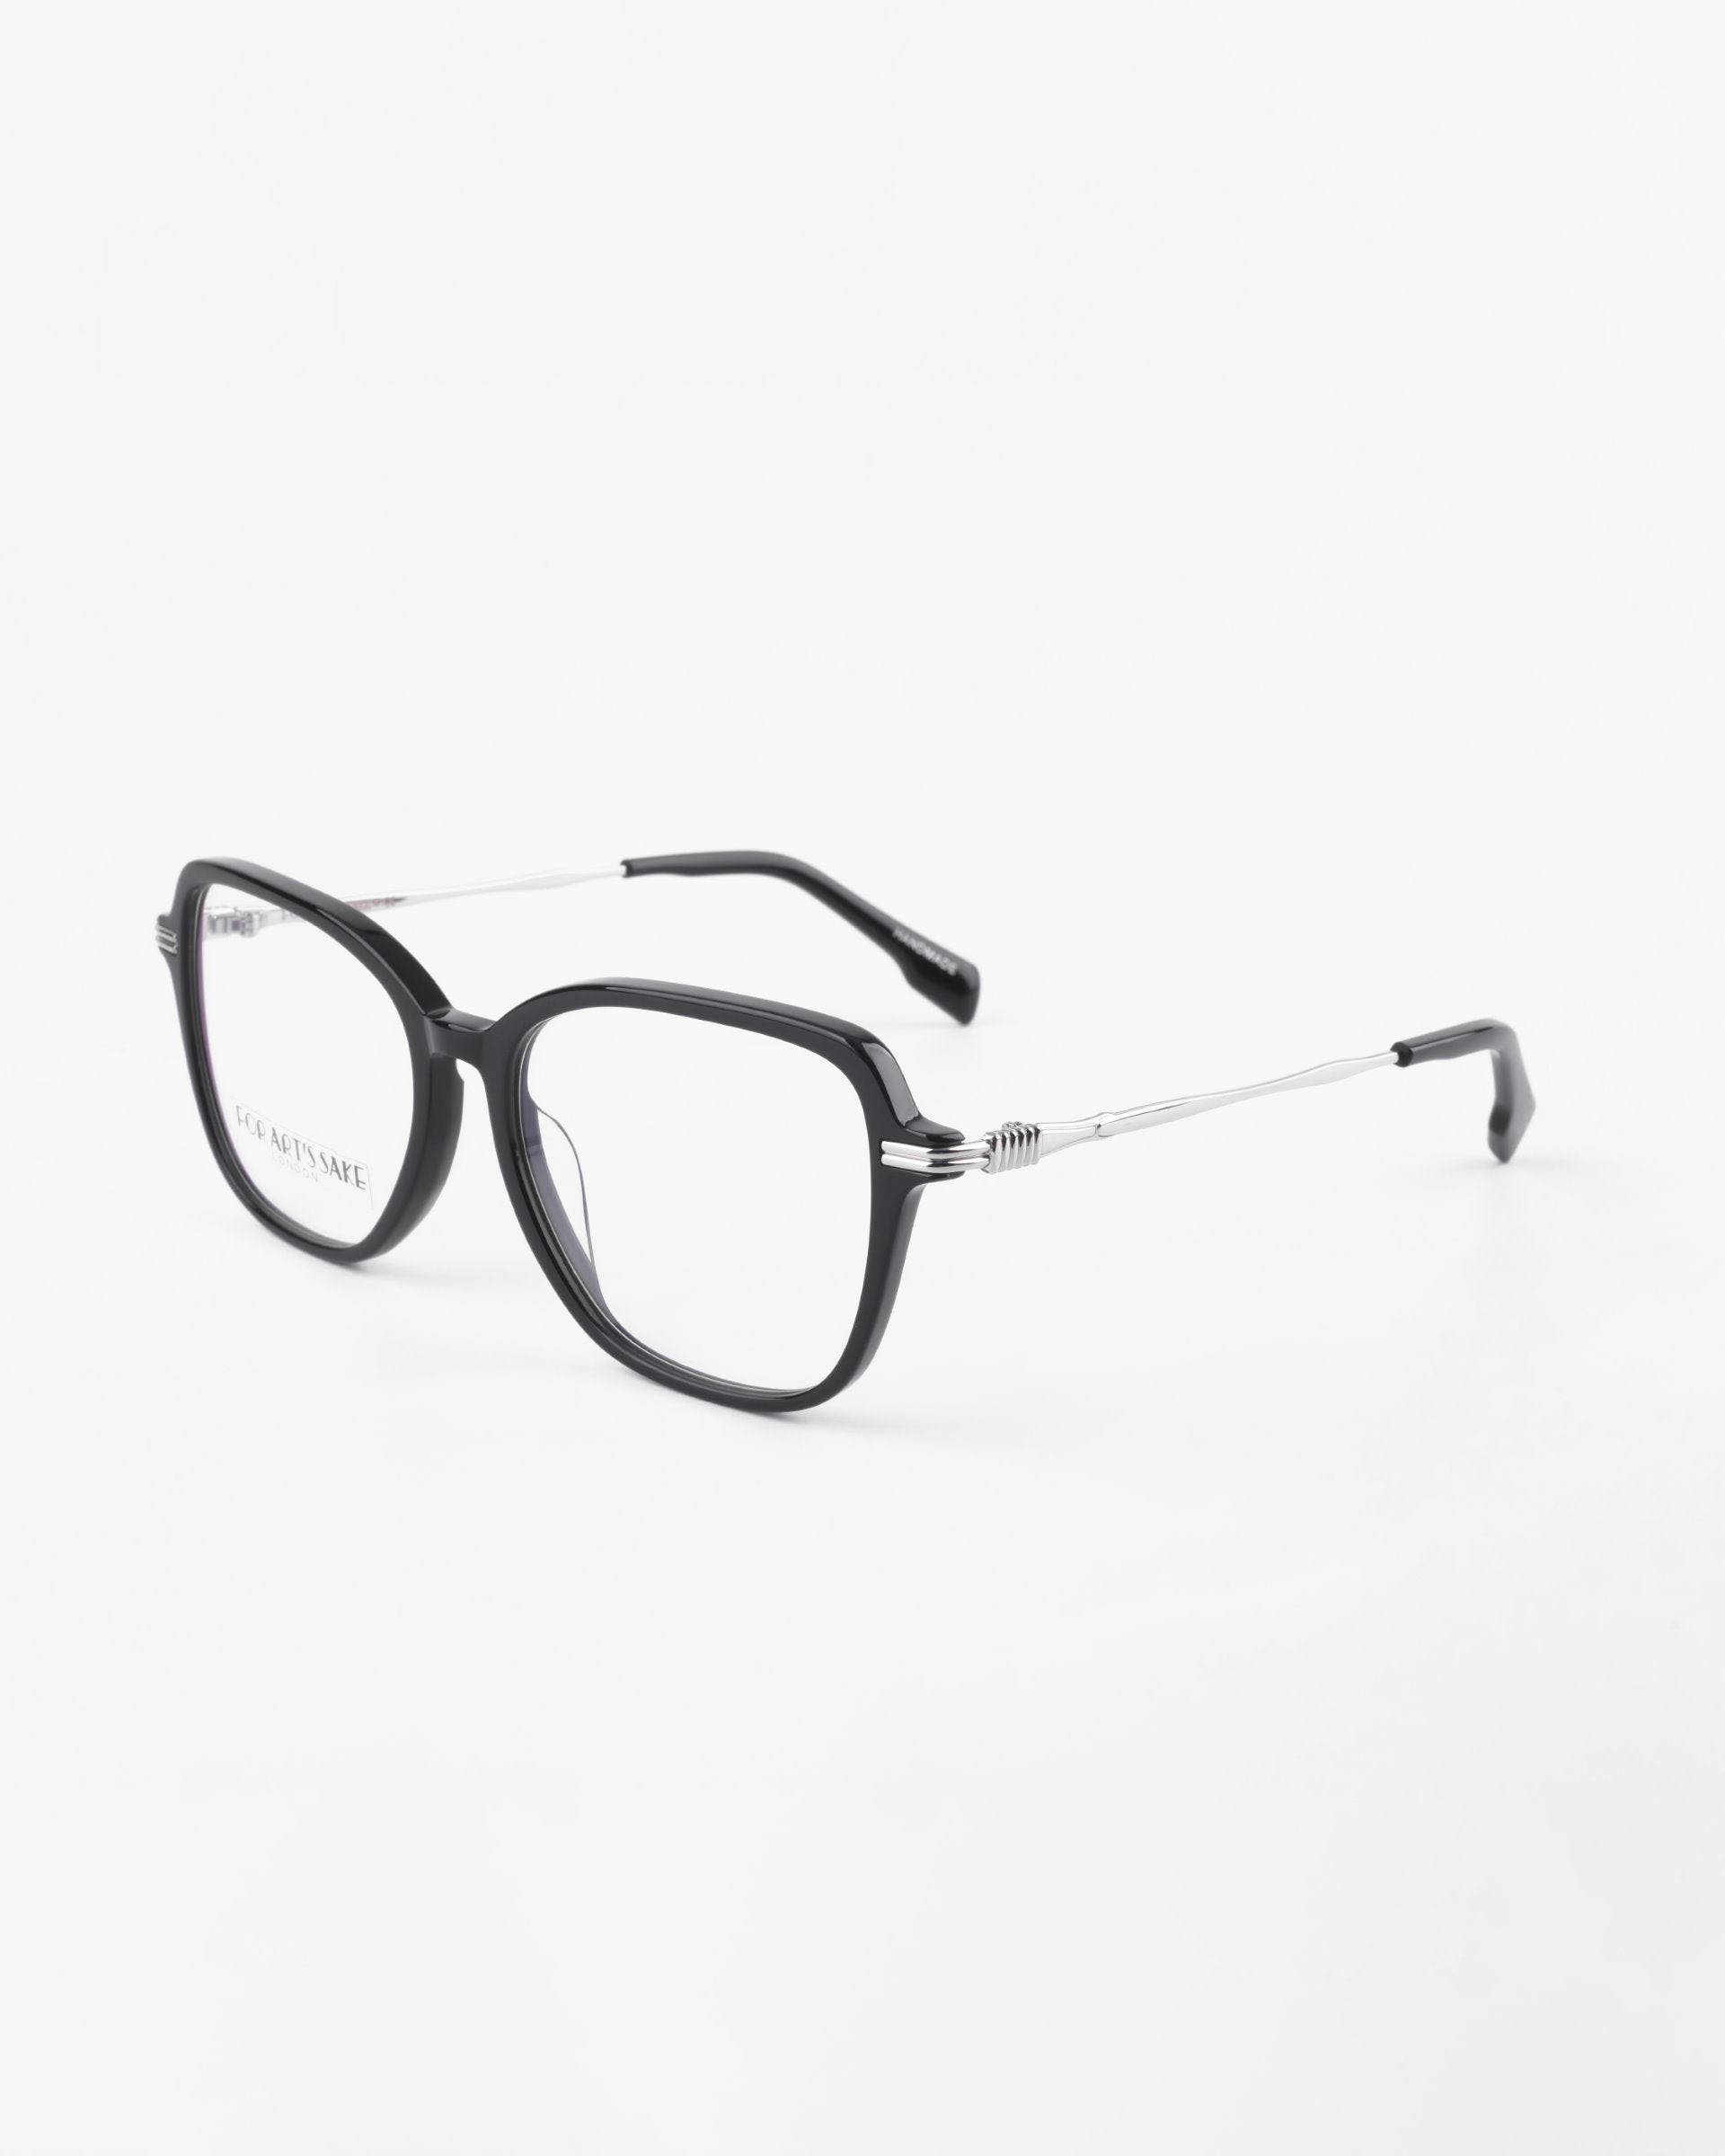 A pair of black, rectangular Sonnet eyeglasses from For Art's Sake® with a thin silver frame around the lenses. The arms are black at the tips with a spring hinge detail near the frame. Featuring blue light filter for added eye protection, the glasses are positioned on a white surface.